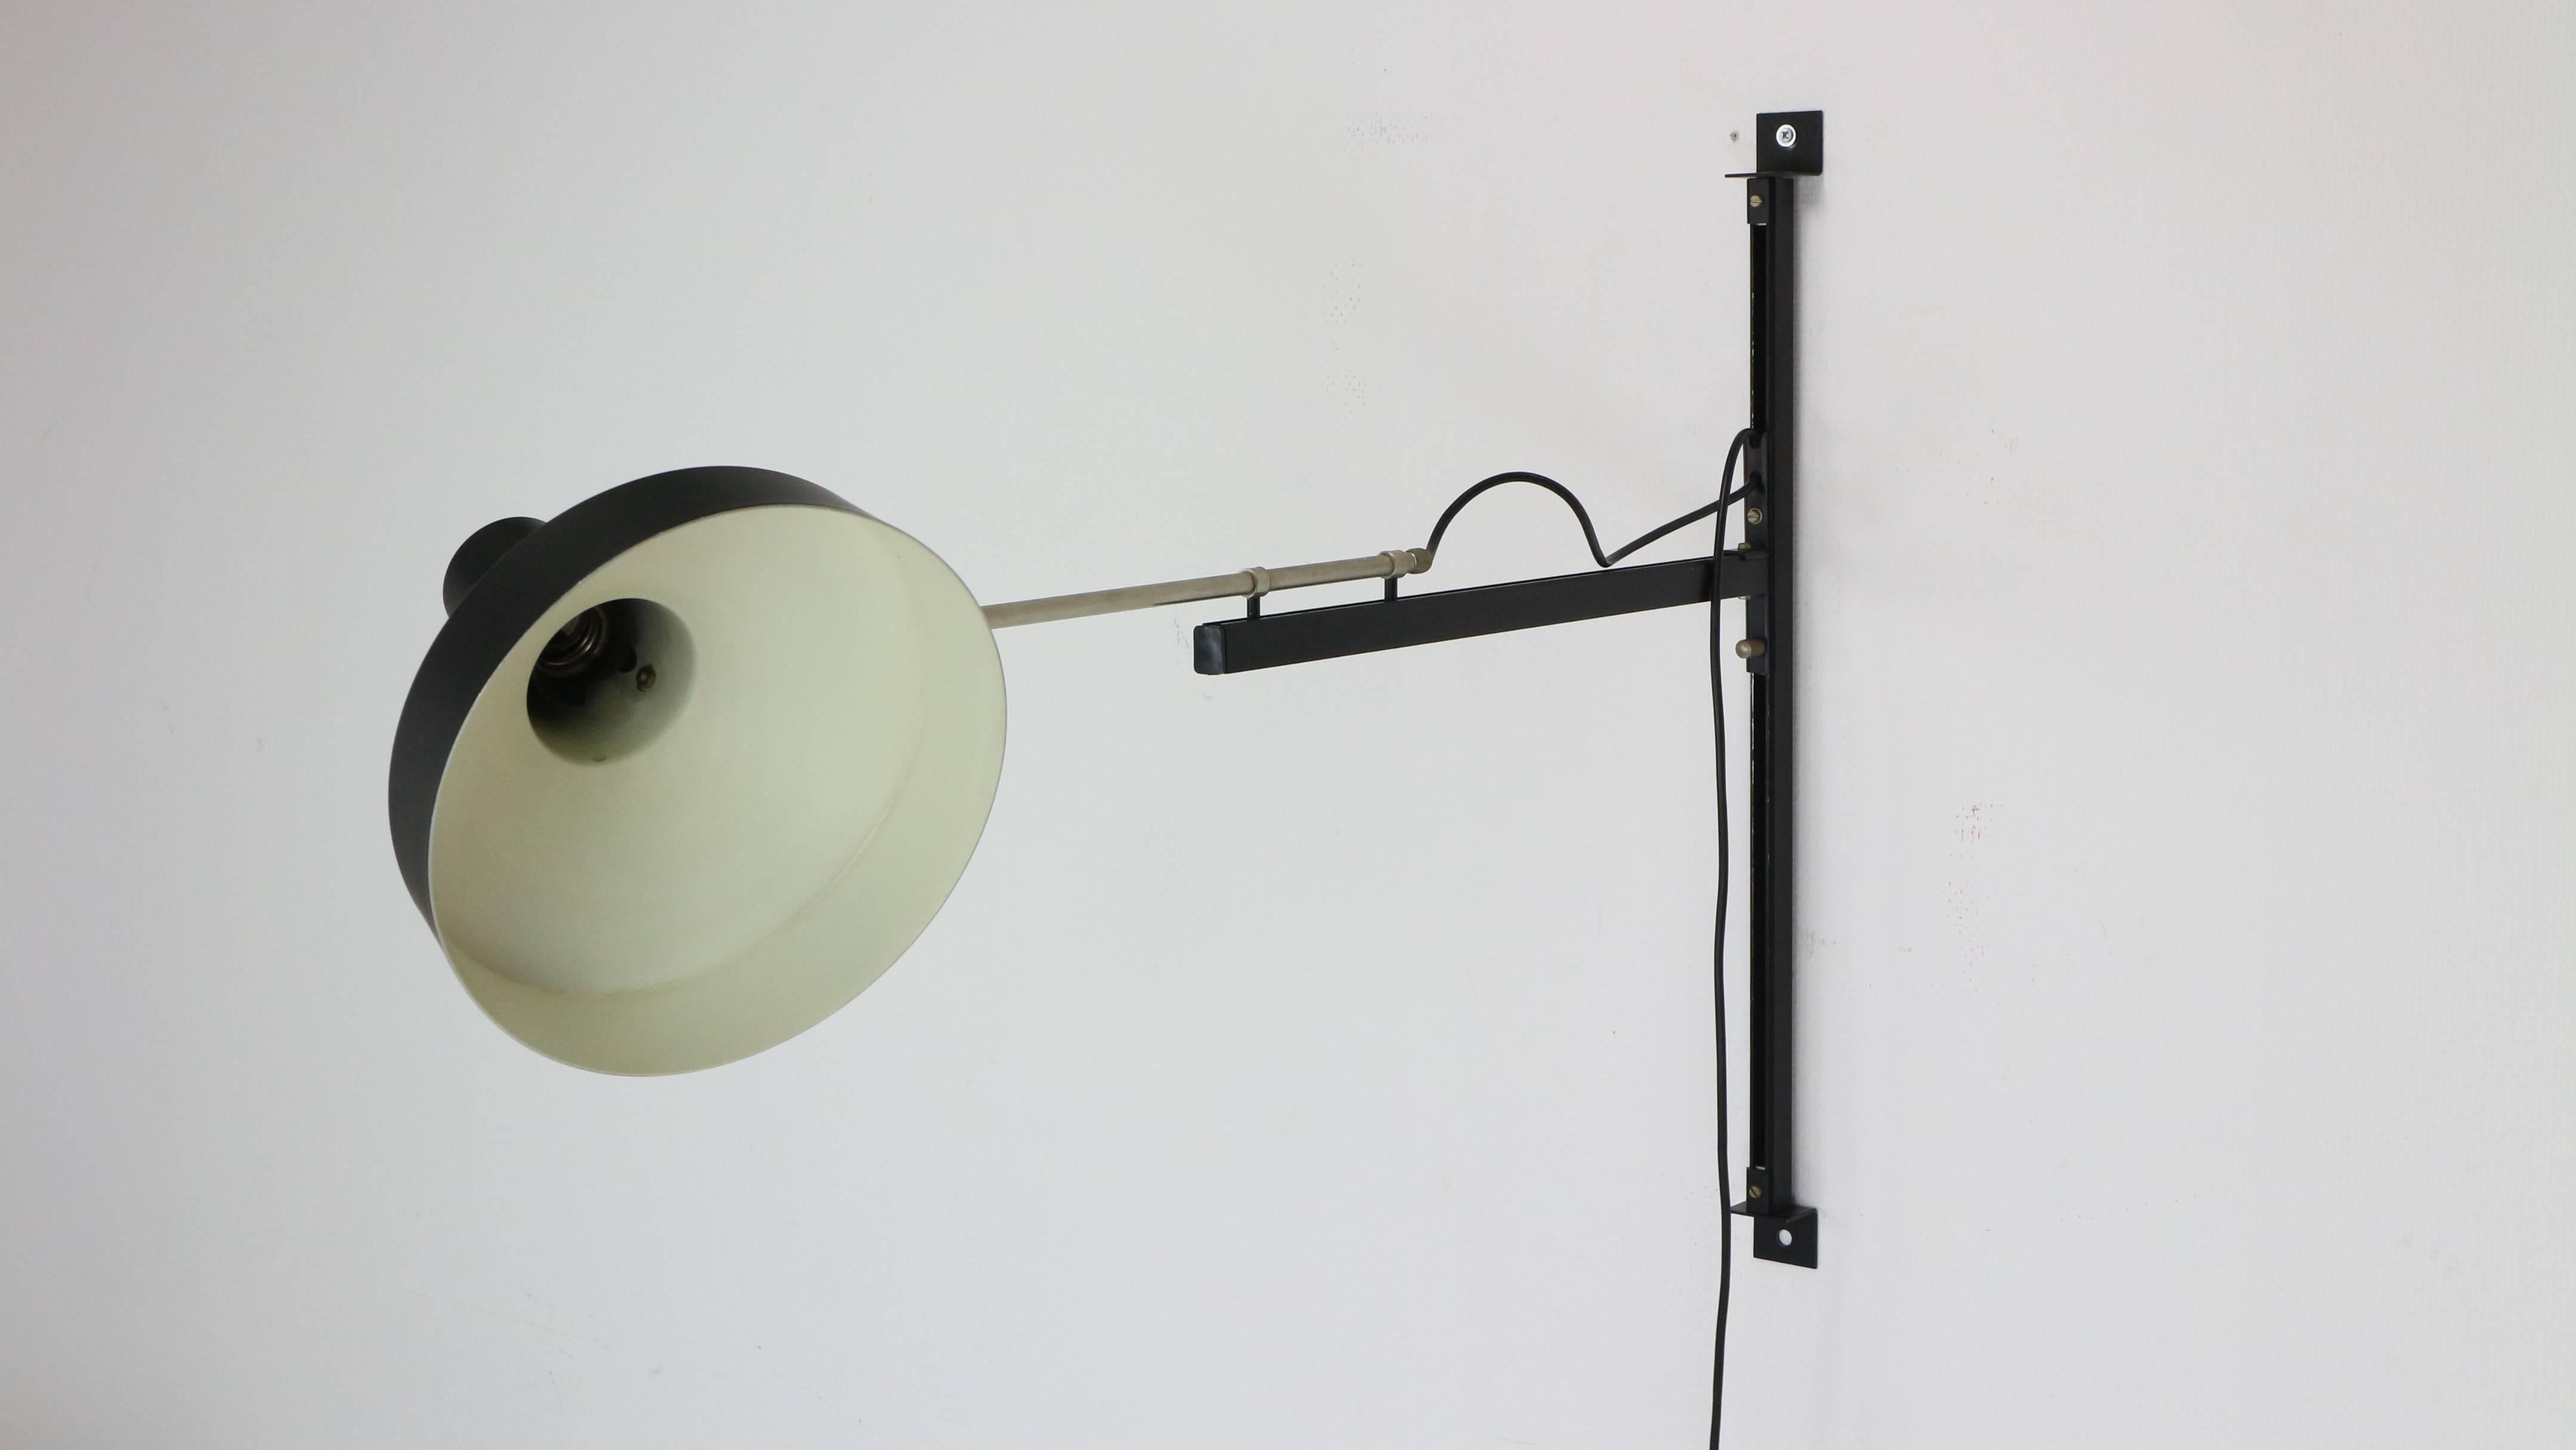 Telescope wall lamp designed by Niek Hiemstra, circa 1960 for Hiemstra Evolux. The lamp is adjustable in height along the wall suspension and the arm can be extended by pulling it and can rotate 180 degrees. The shade can be directed in many